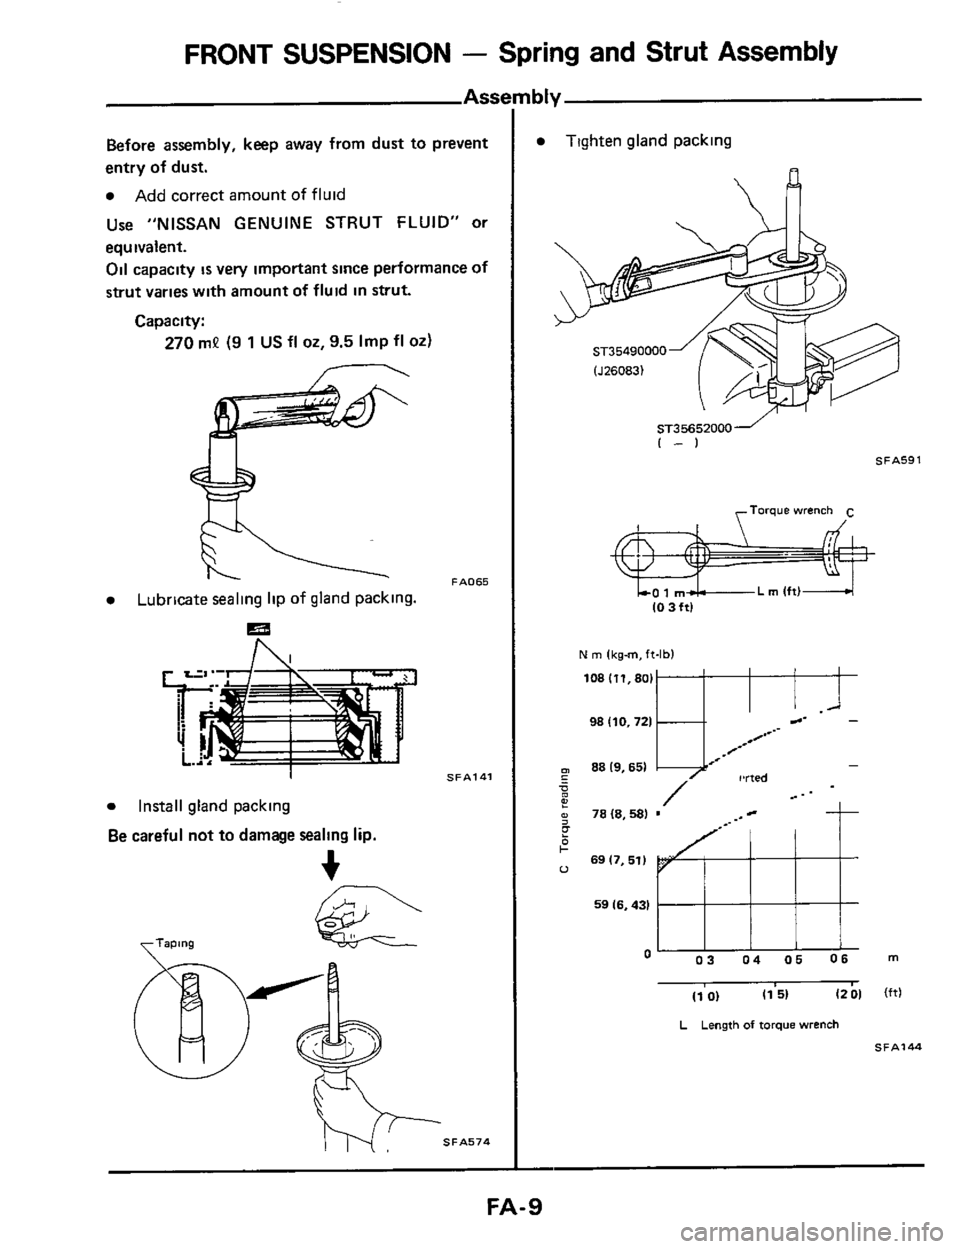 NISSAN 300ZX 1984 Z31 Front Suspension Workshop Manual FRONT SUSPENSION - Spring and Strut Assembly 
c _. _. 
e 78i8.581 . 
: + 
0 
59 16,431 
Assc 
Before assembly,  keep away  from dust to prevent 
entry  of dust. 
Use "NISSAN GENUINE STRUT FLUID" or 
e